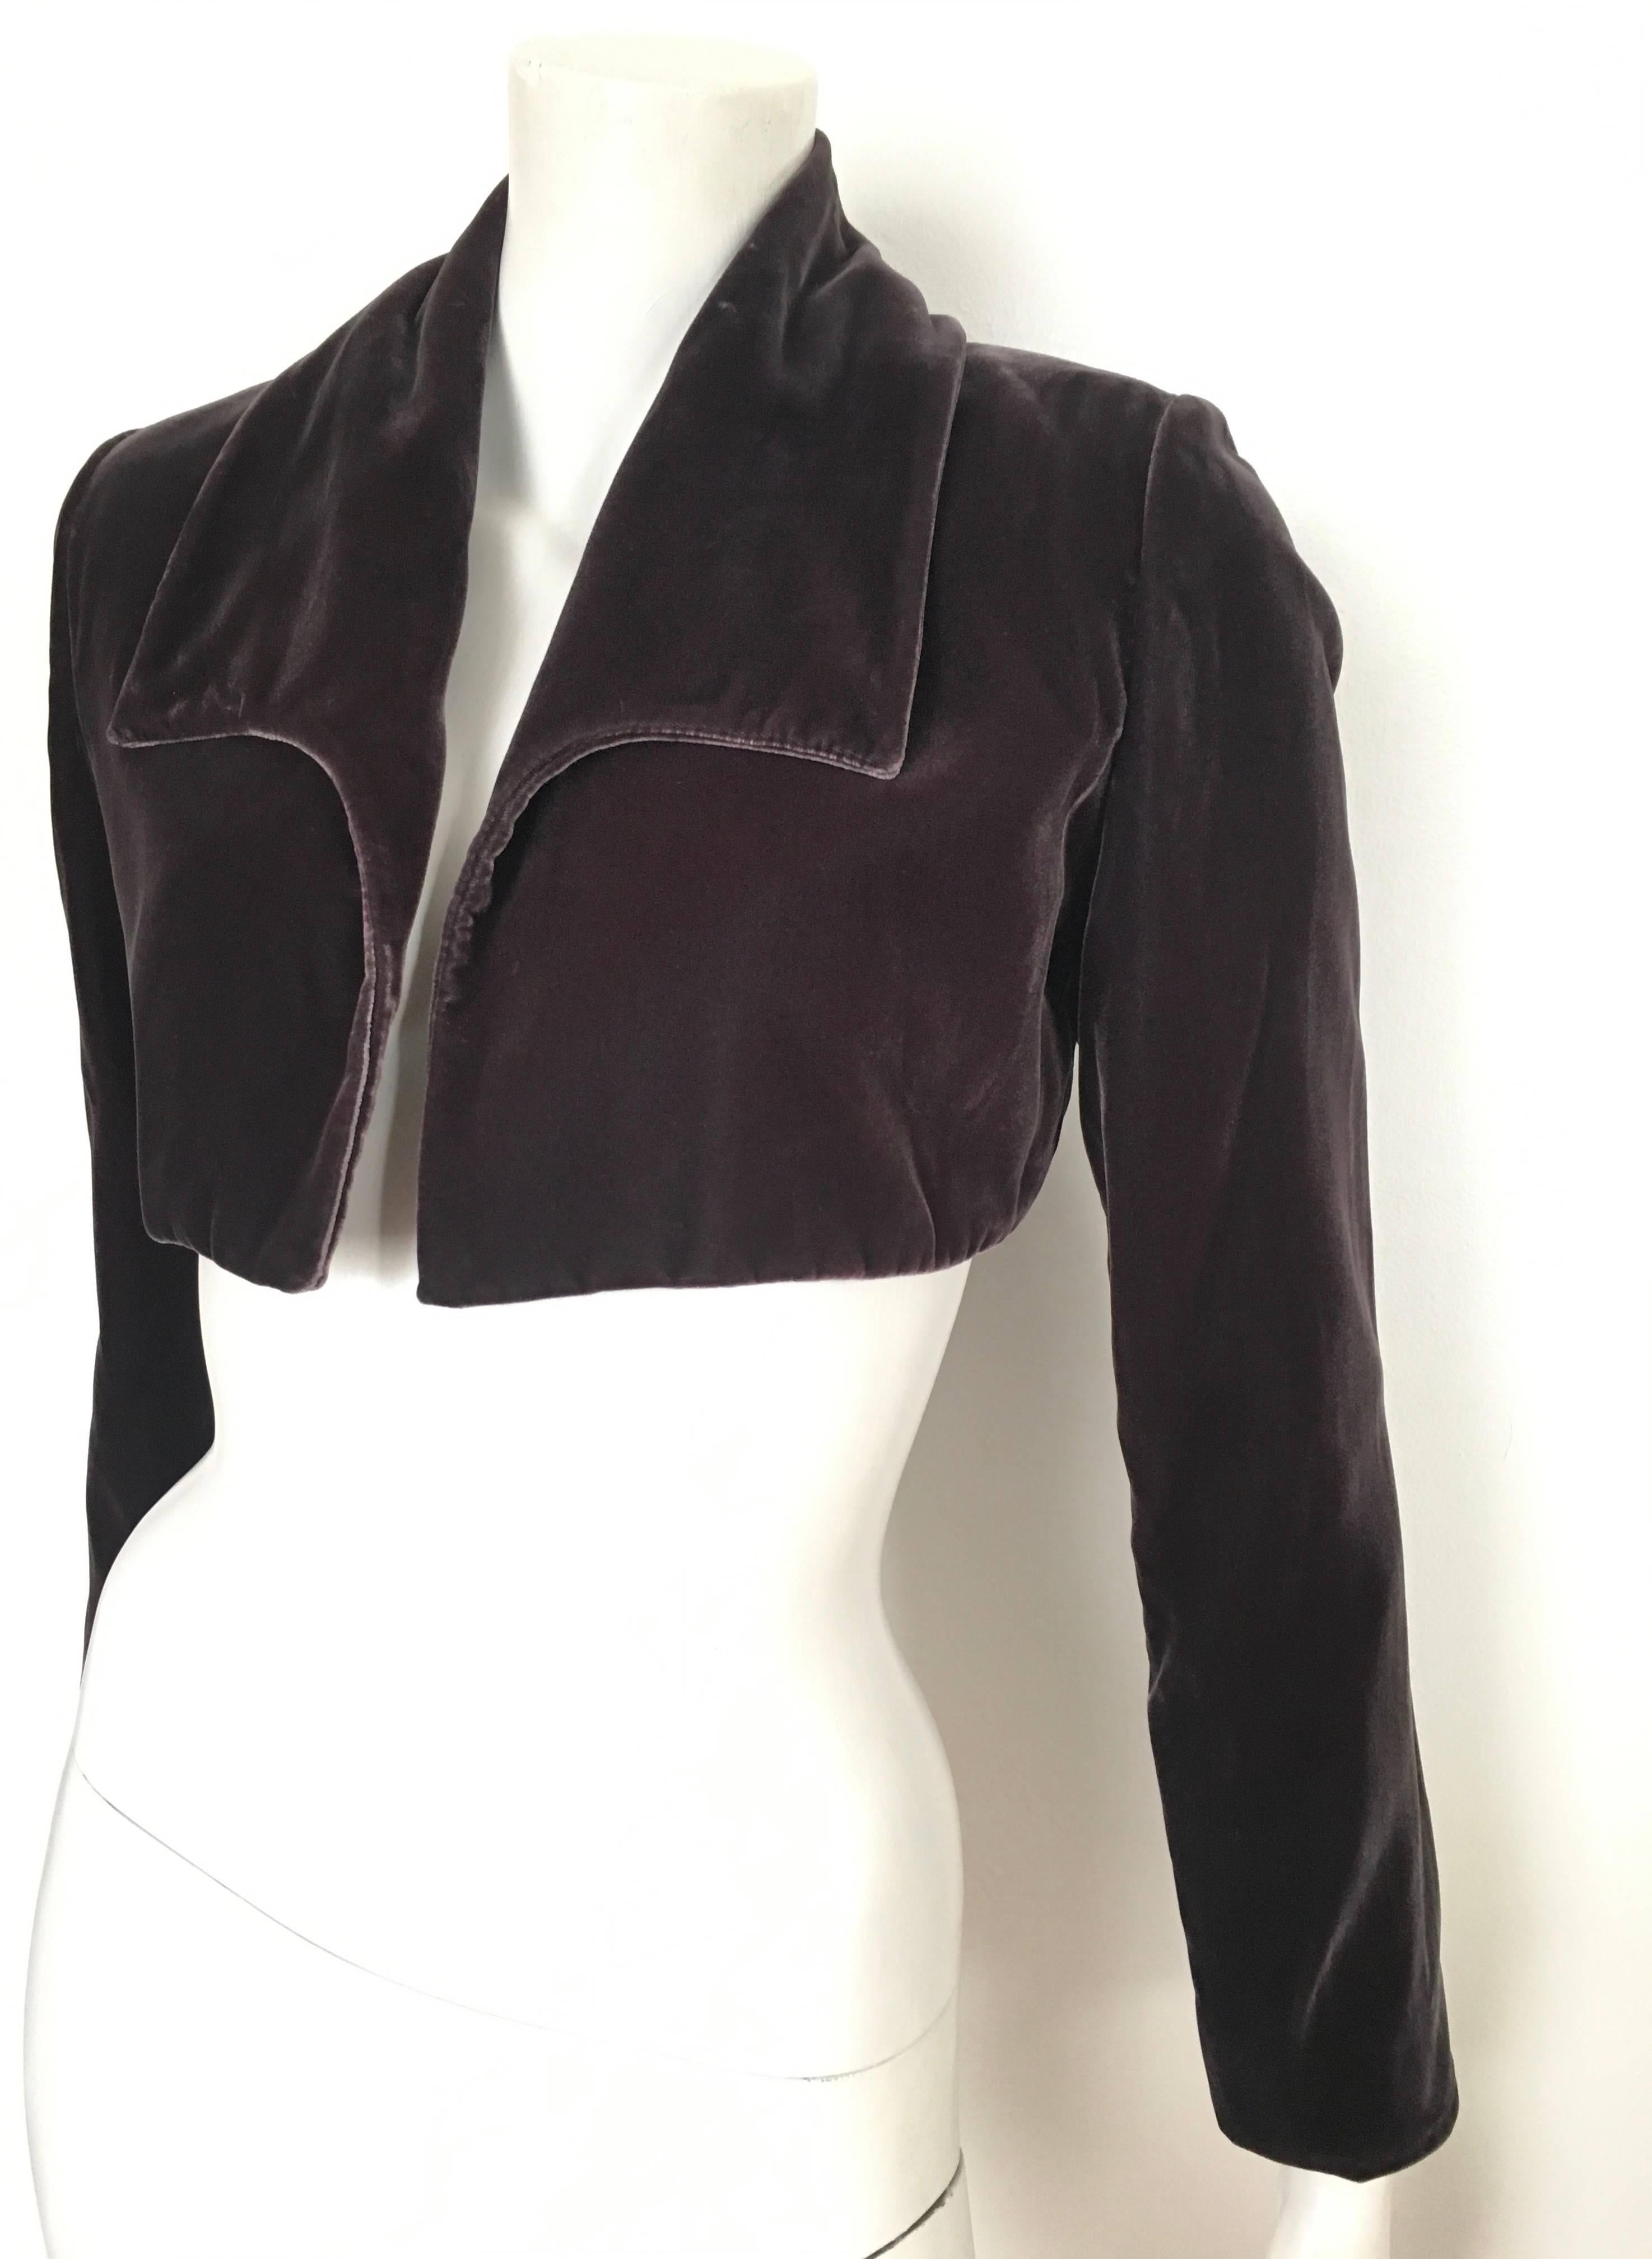 Donald Deal for Neiman Marcus 1990s cropped eggplant color silk velvet cropped jacket is an USA size 6. Ladies please grab your trusted tape measure so you can properly measure your bust & arm length to make certain this gorgeous velvet cropped